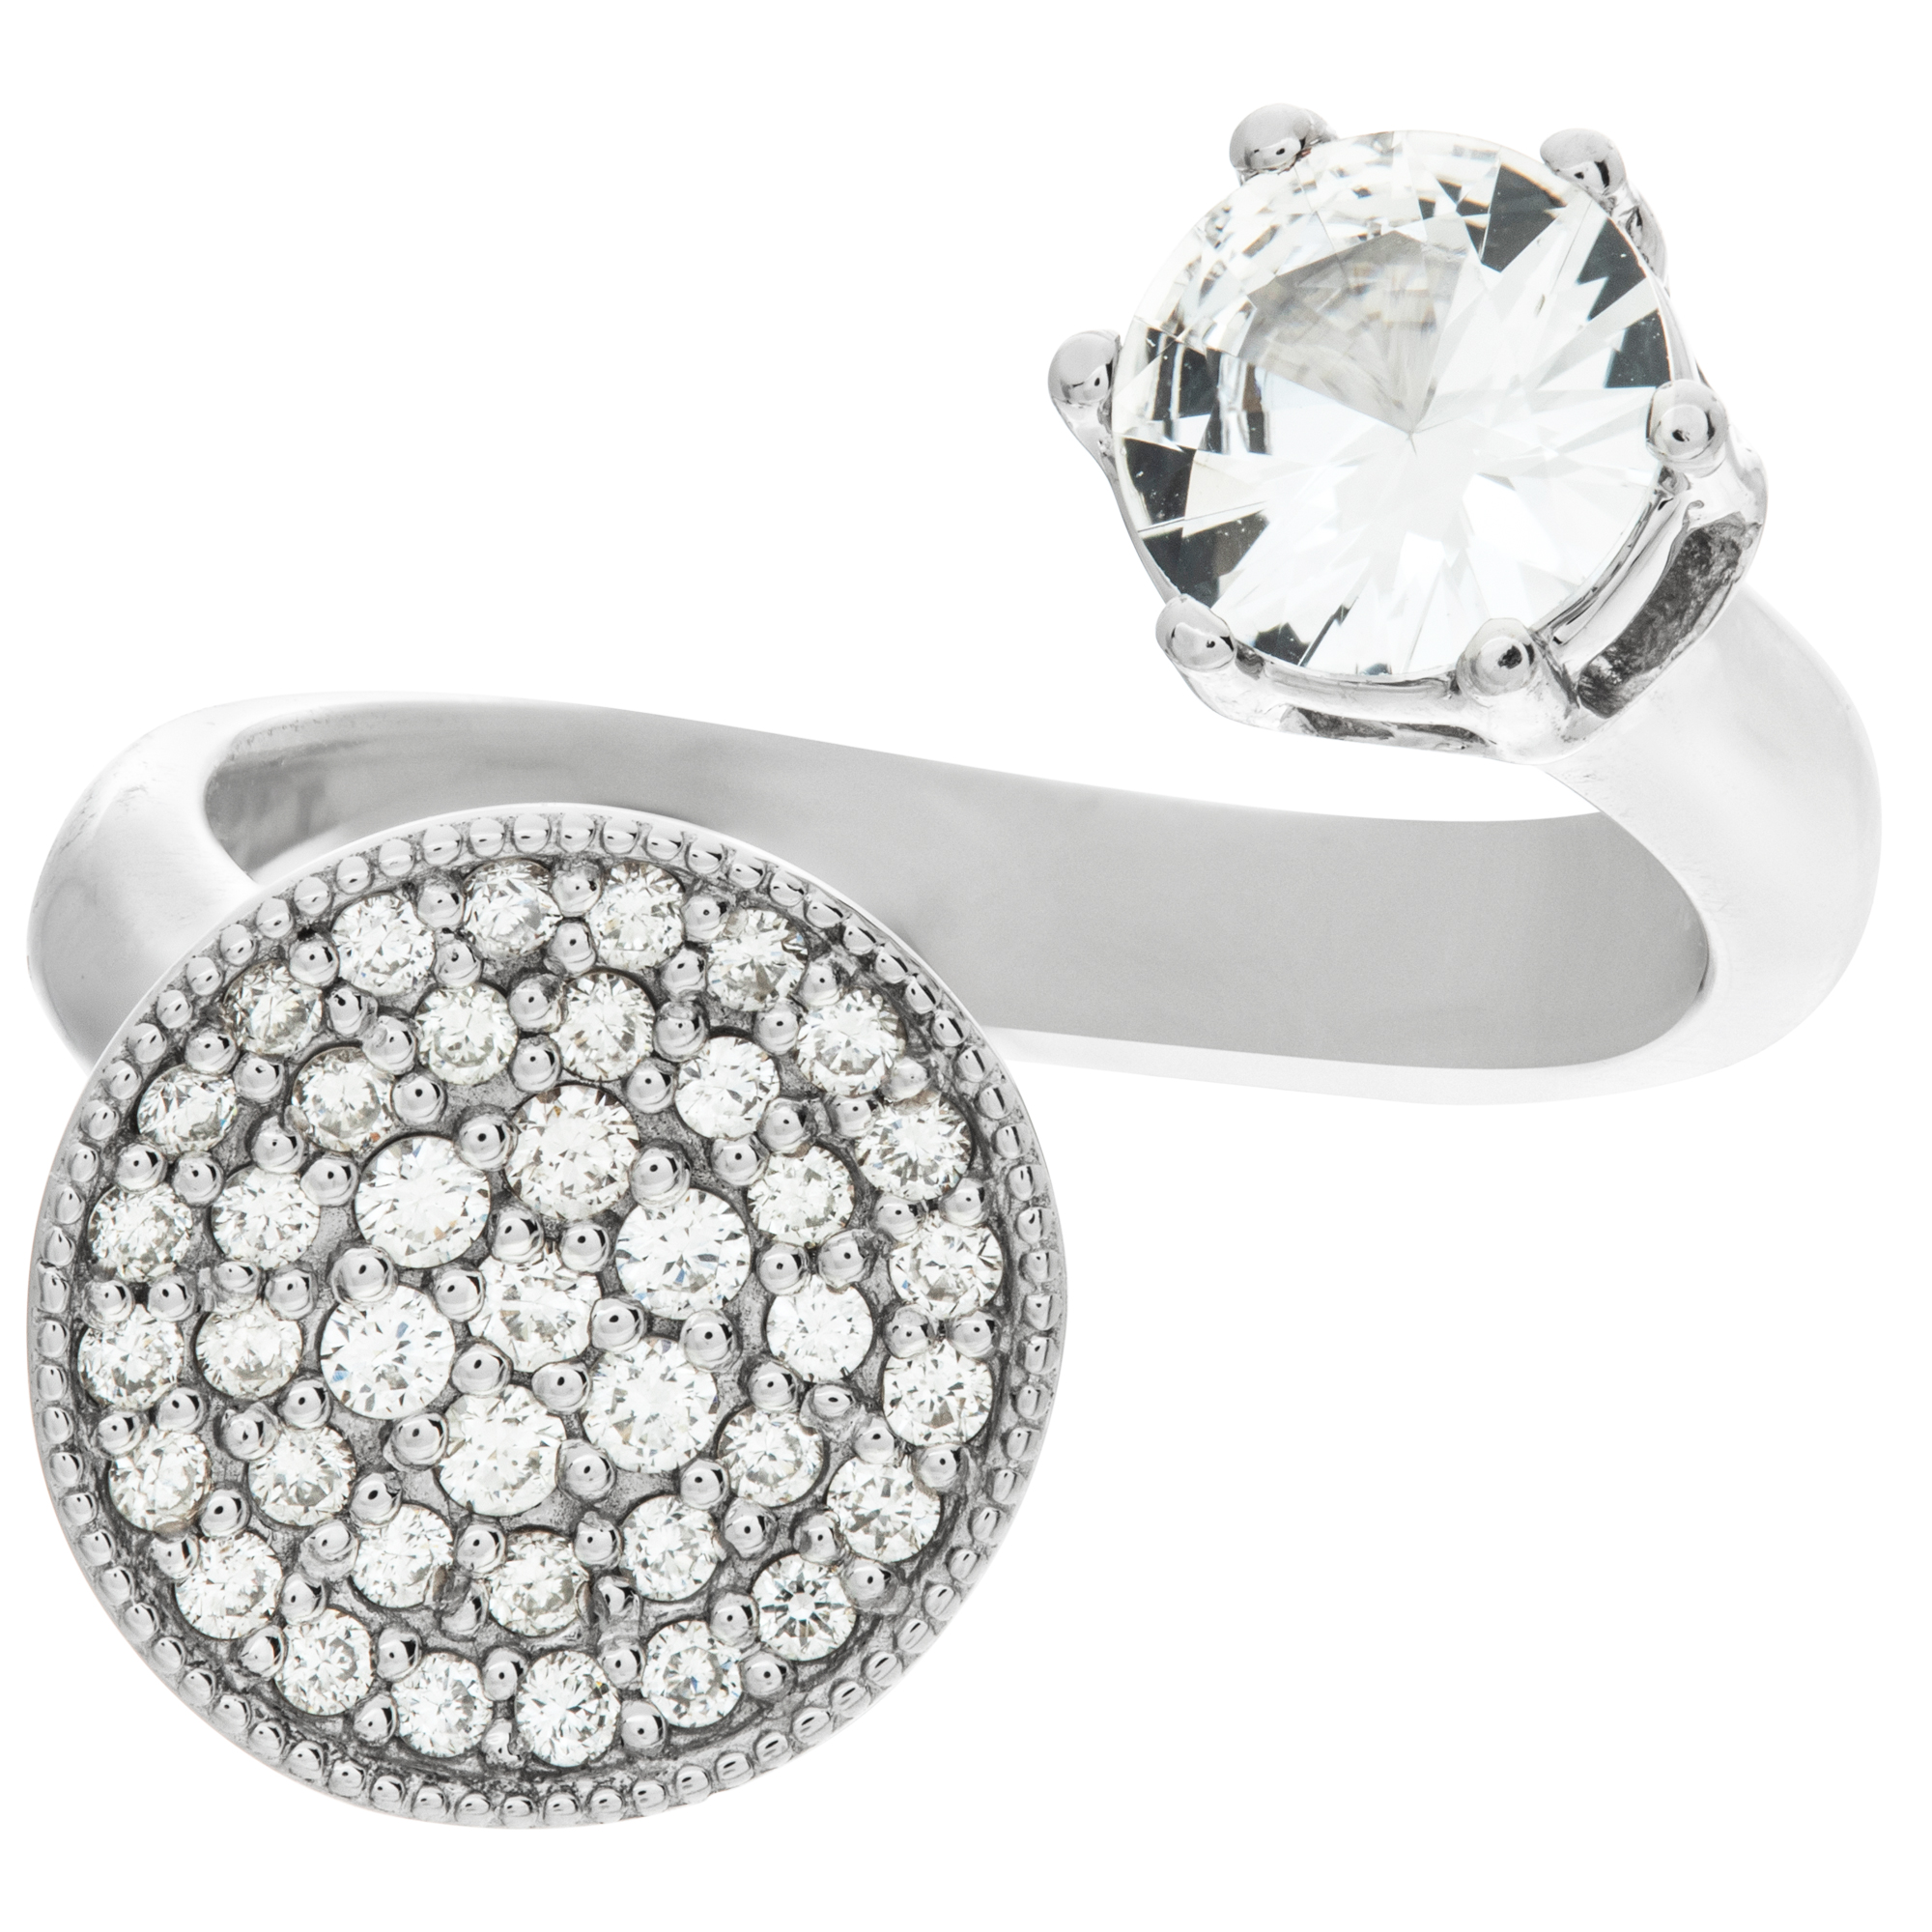 Pave Diamond and white sapphire ring set in 18k white gold. Size 5.75 image 2